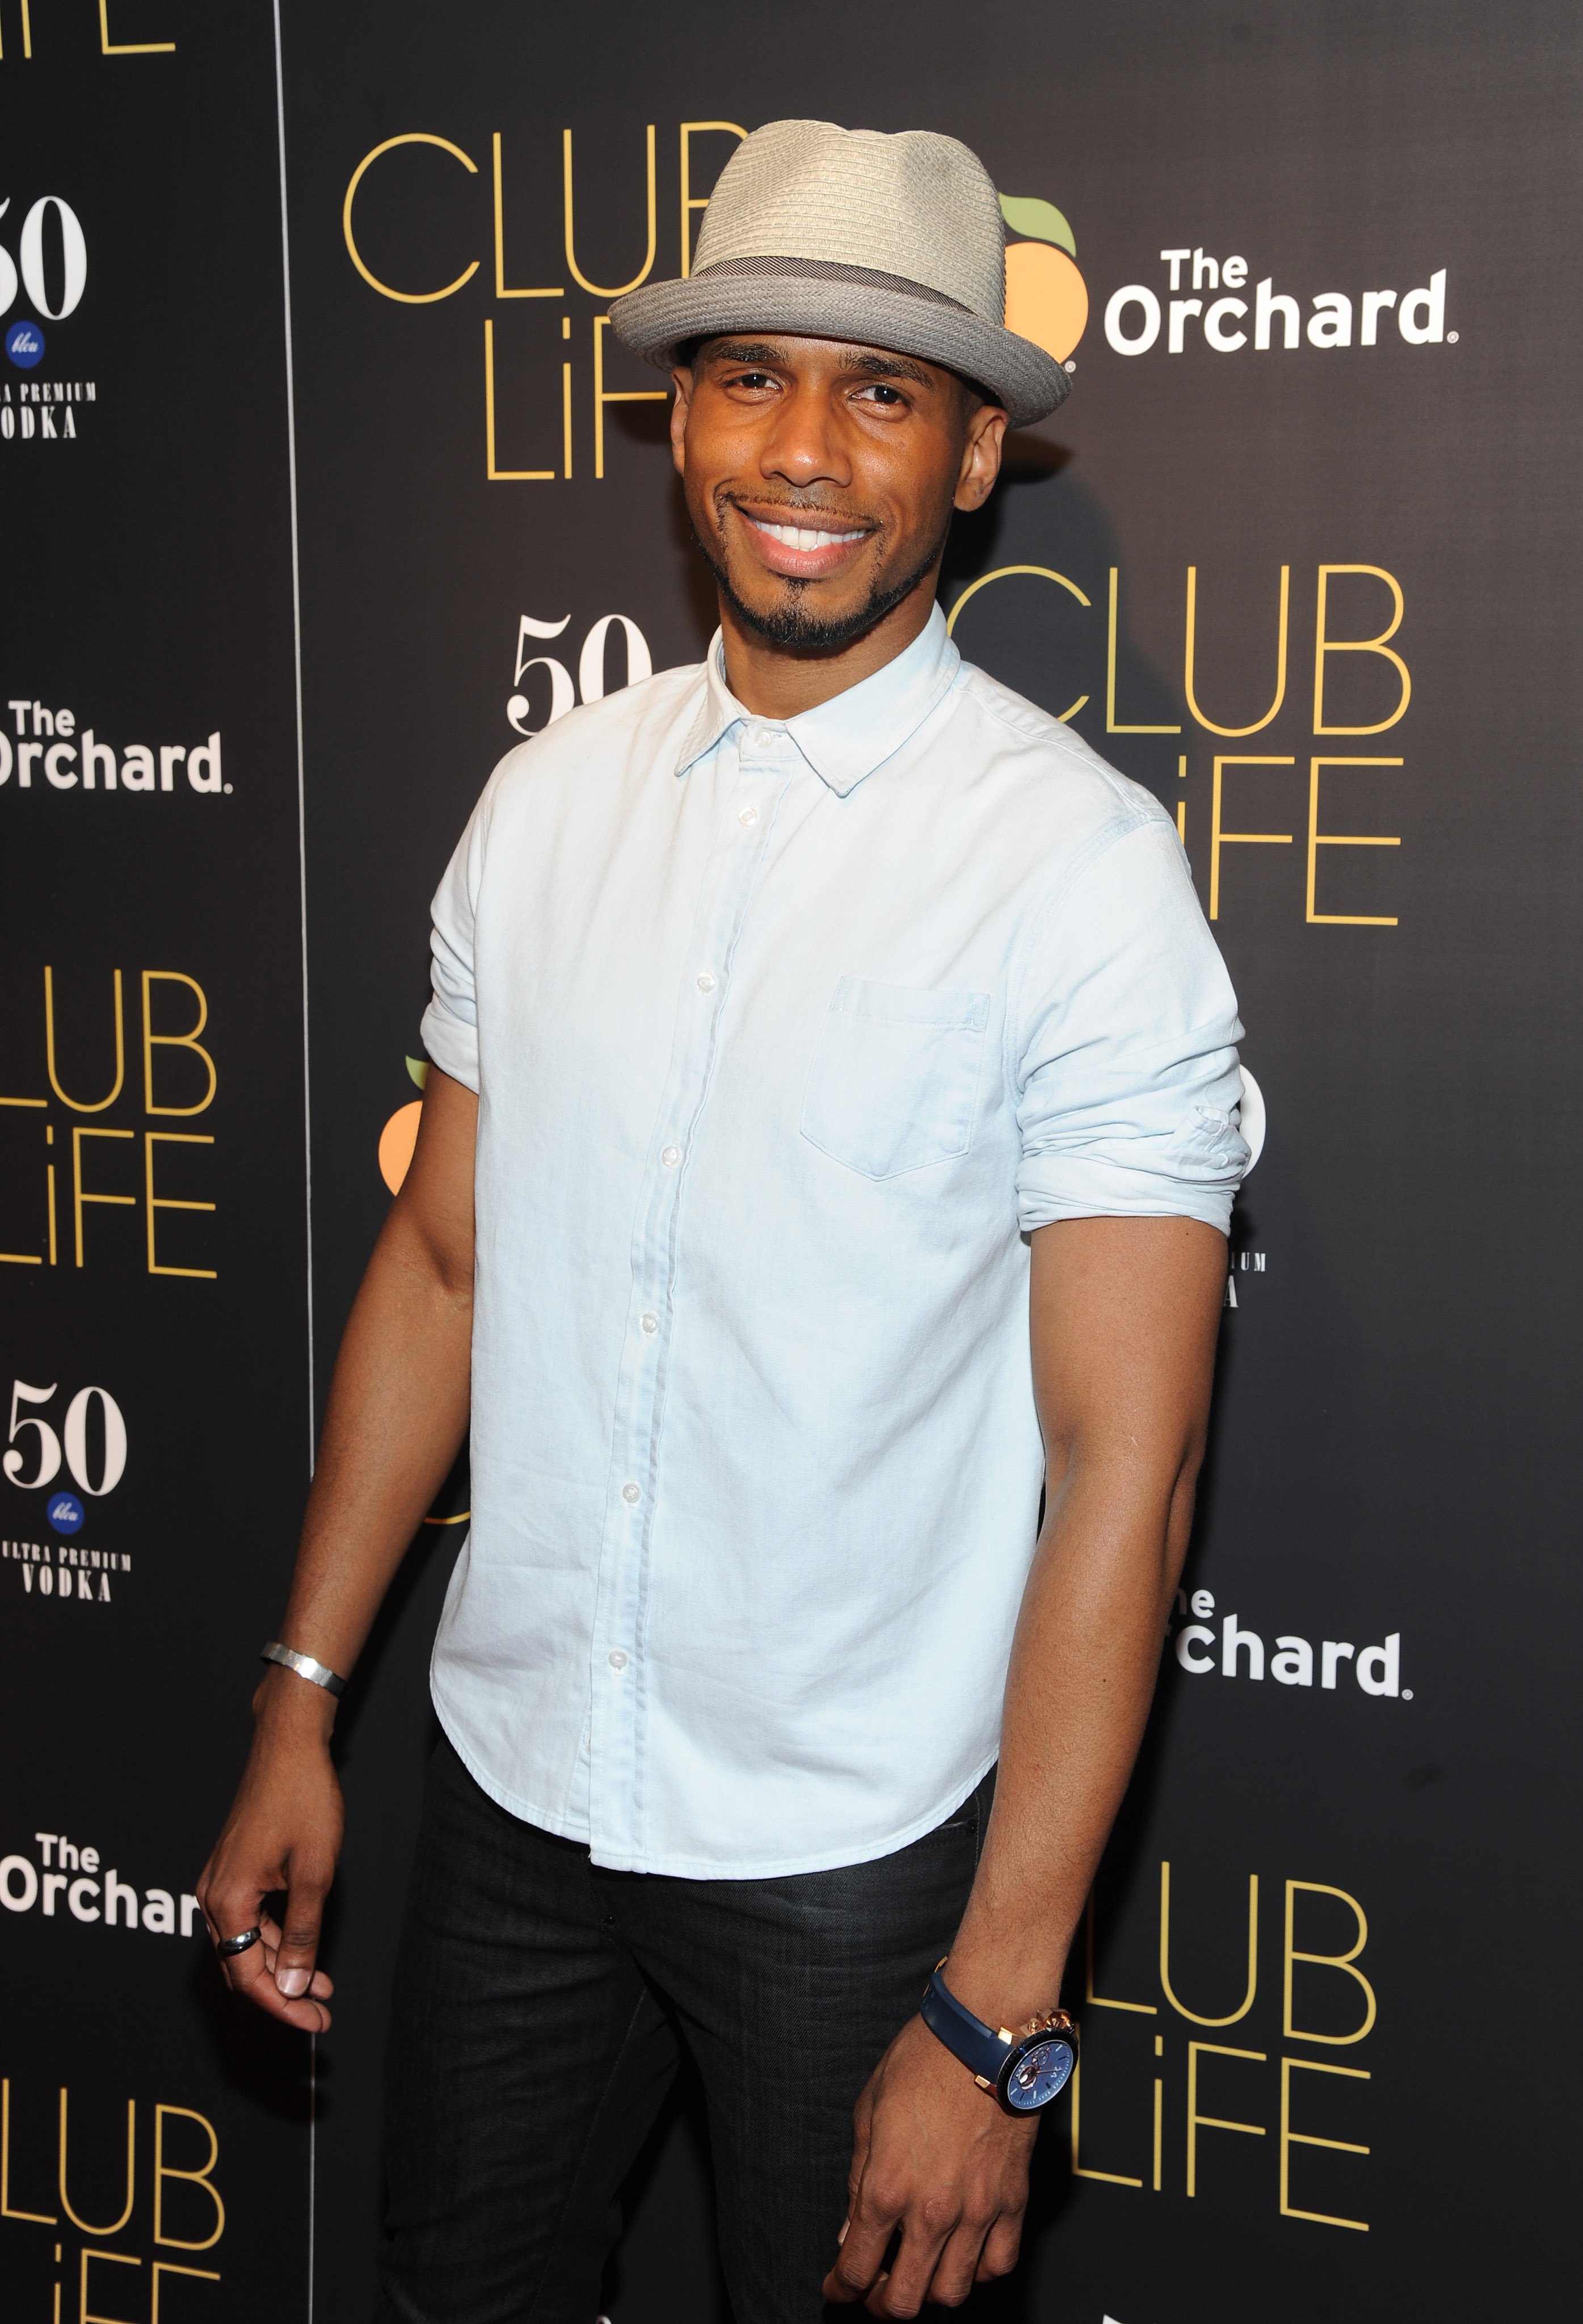 Actor Eric West attends the 'Club Life' New York premiere at Regal Cinemas Union Square on May 26, 2015 in New York City.